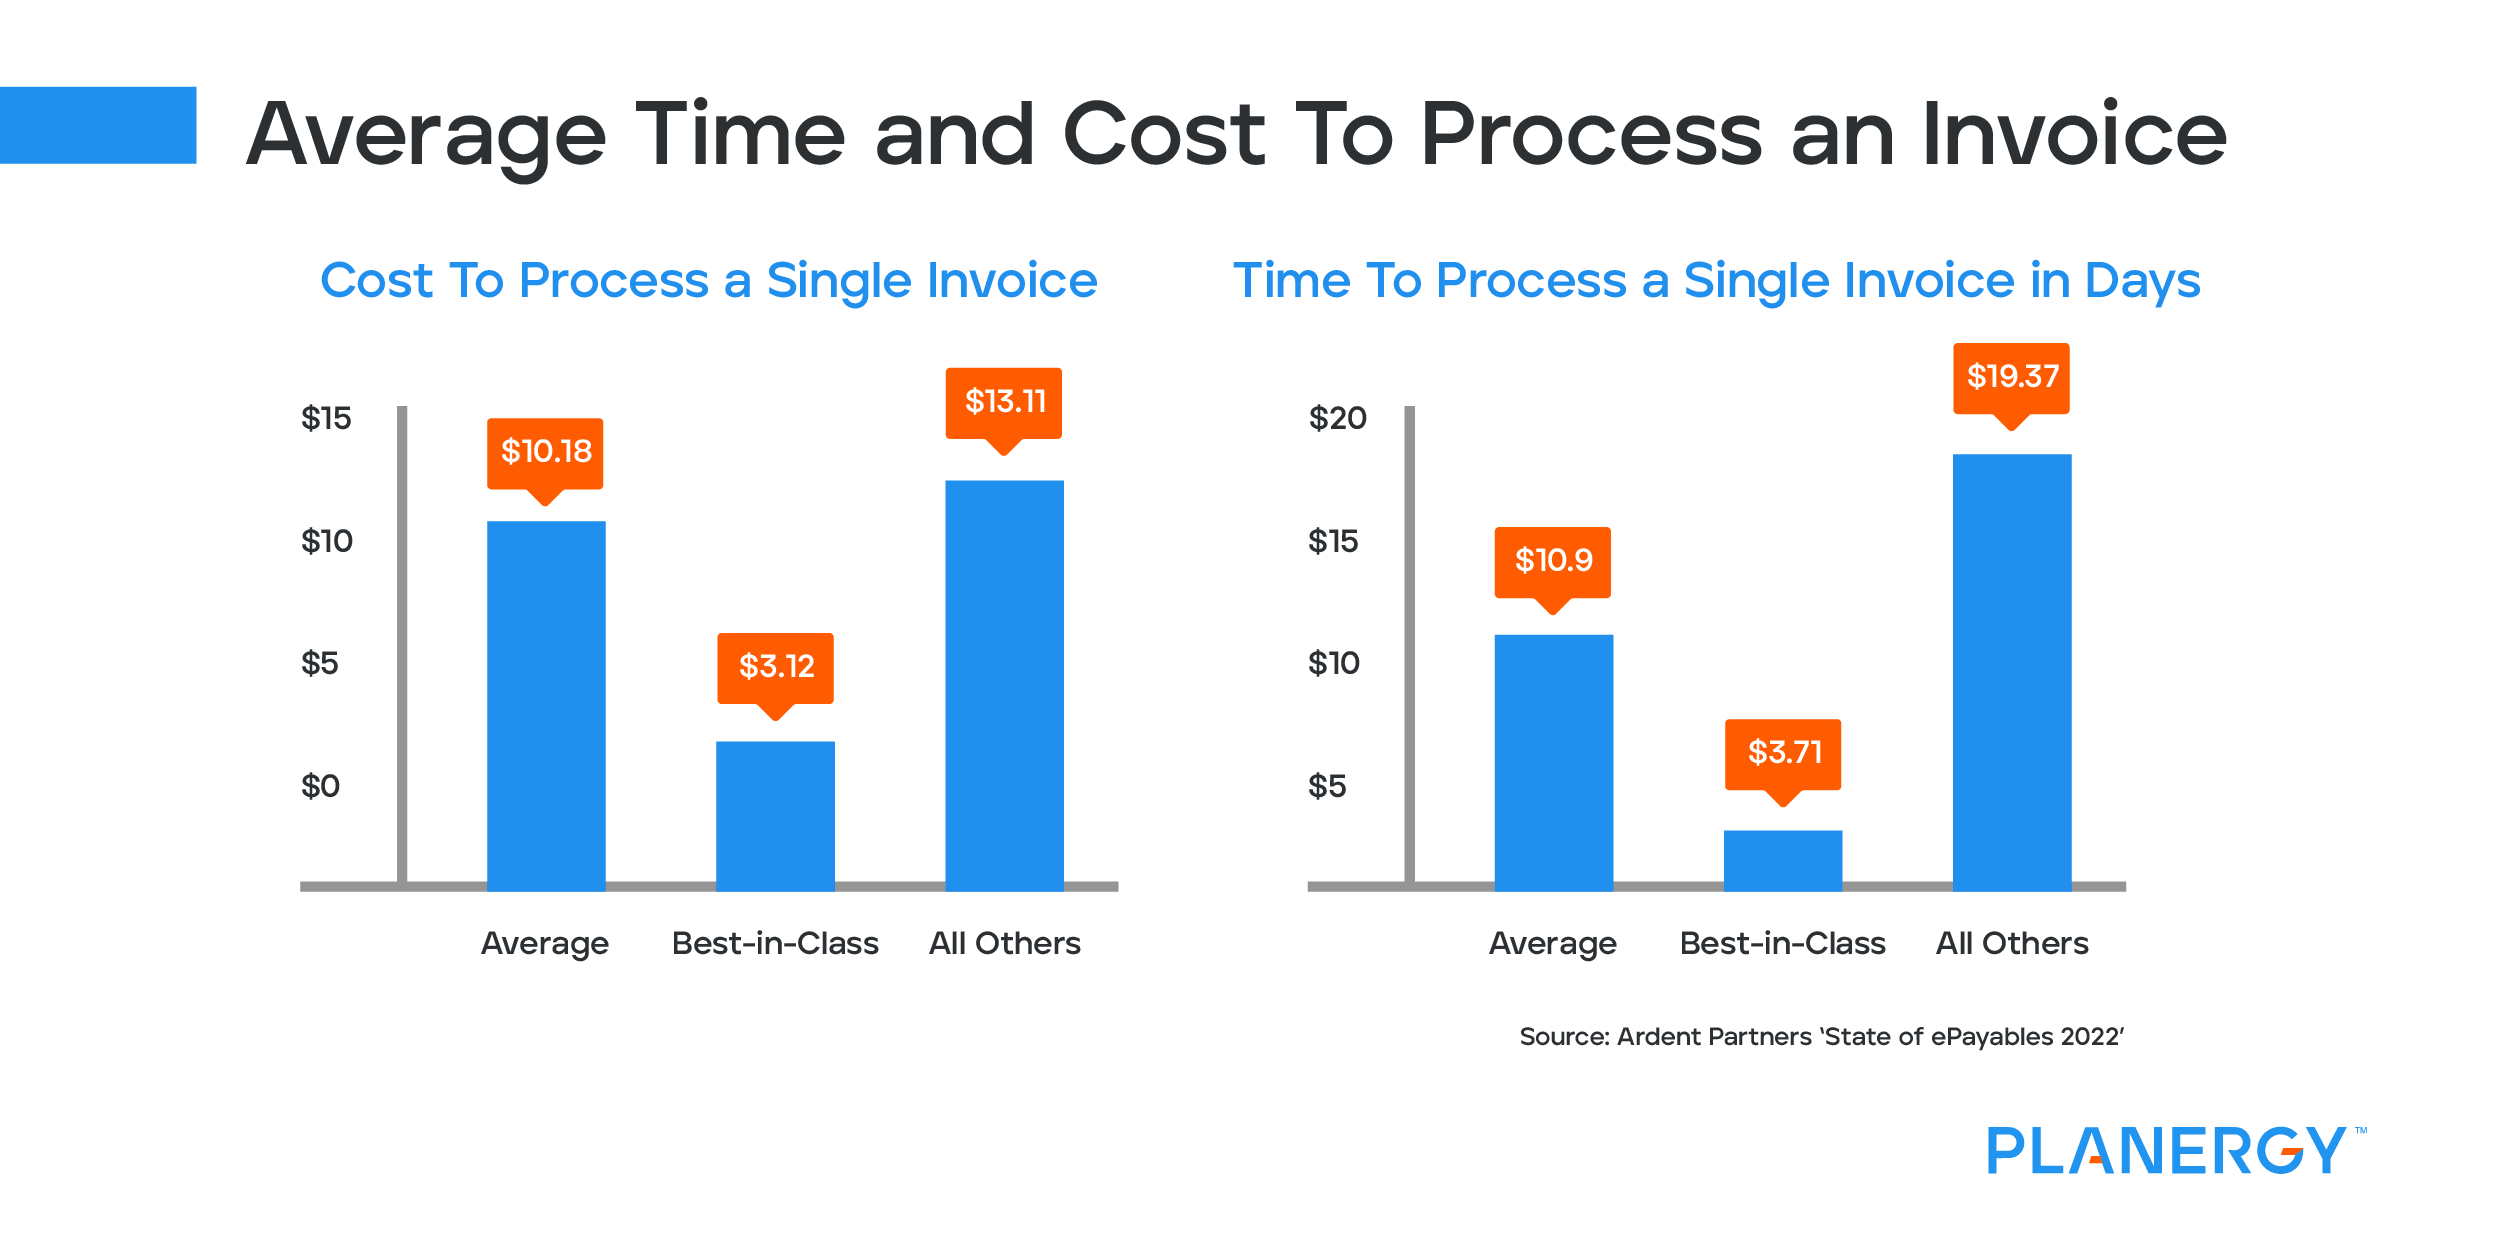 Average Time and Cost to Process an Invoice